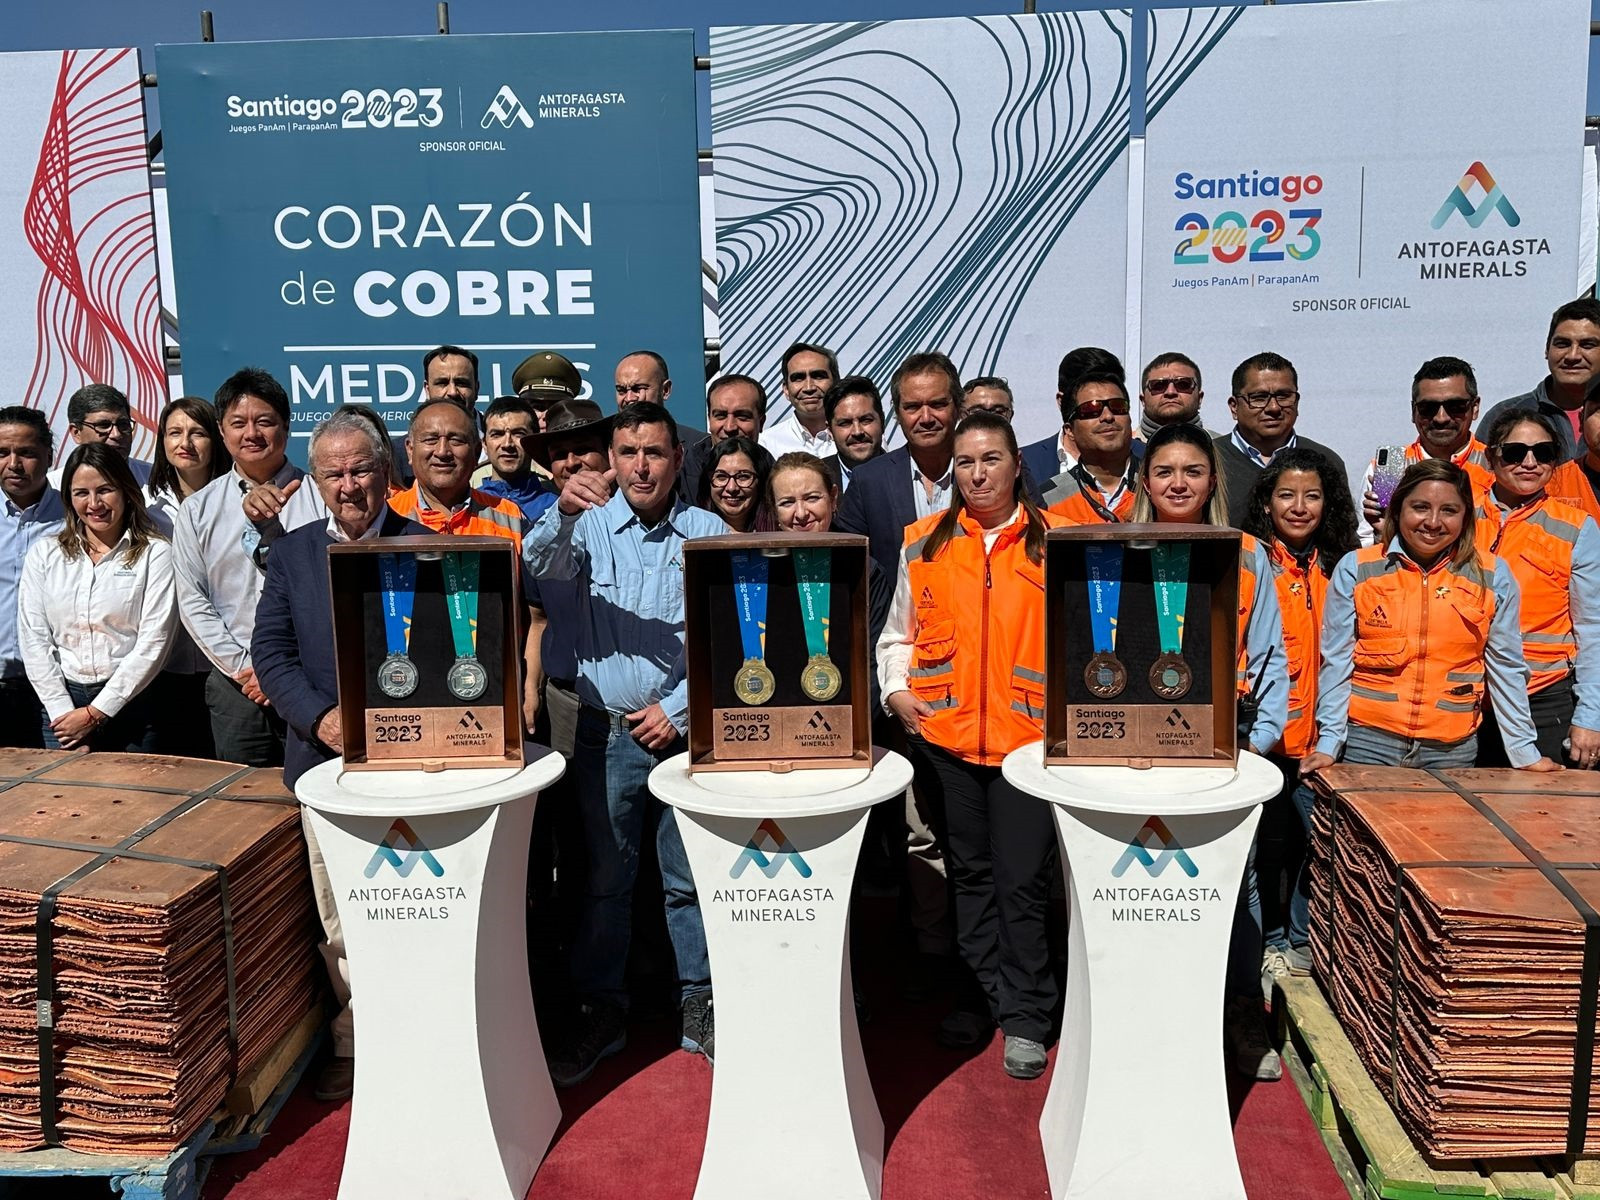 A special unveiling ceremony was held in the middle of the desert where the copper is extracted ©Santiago 2023